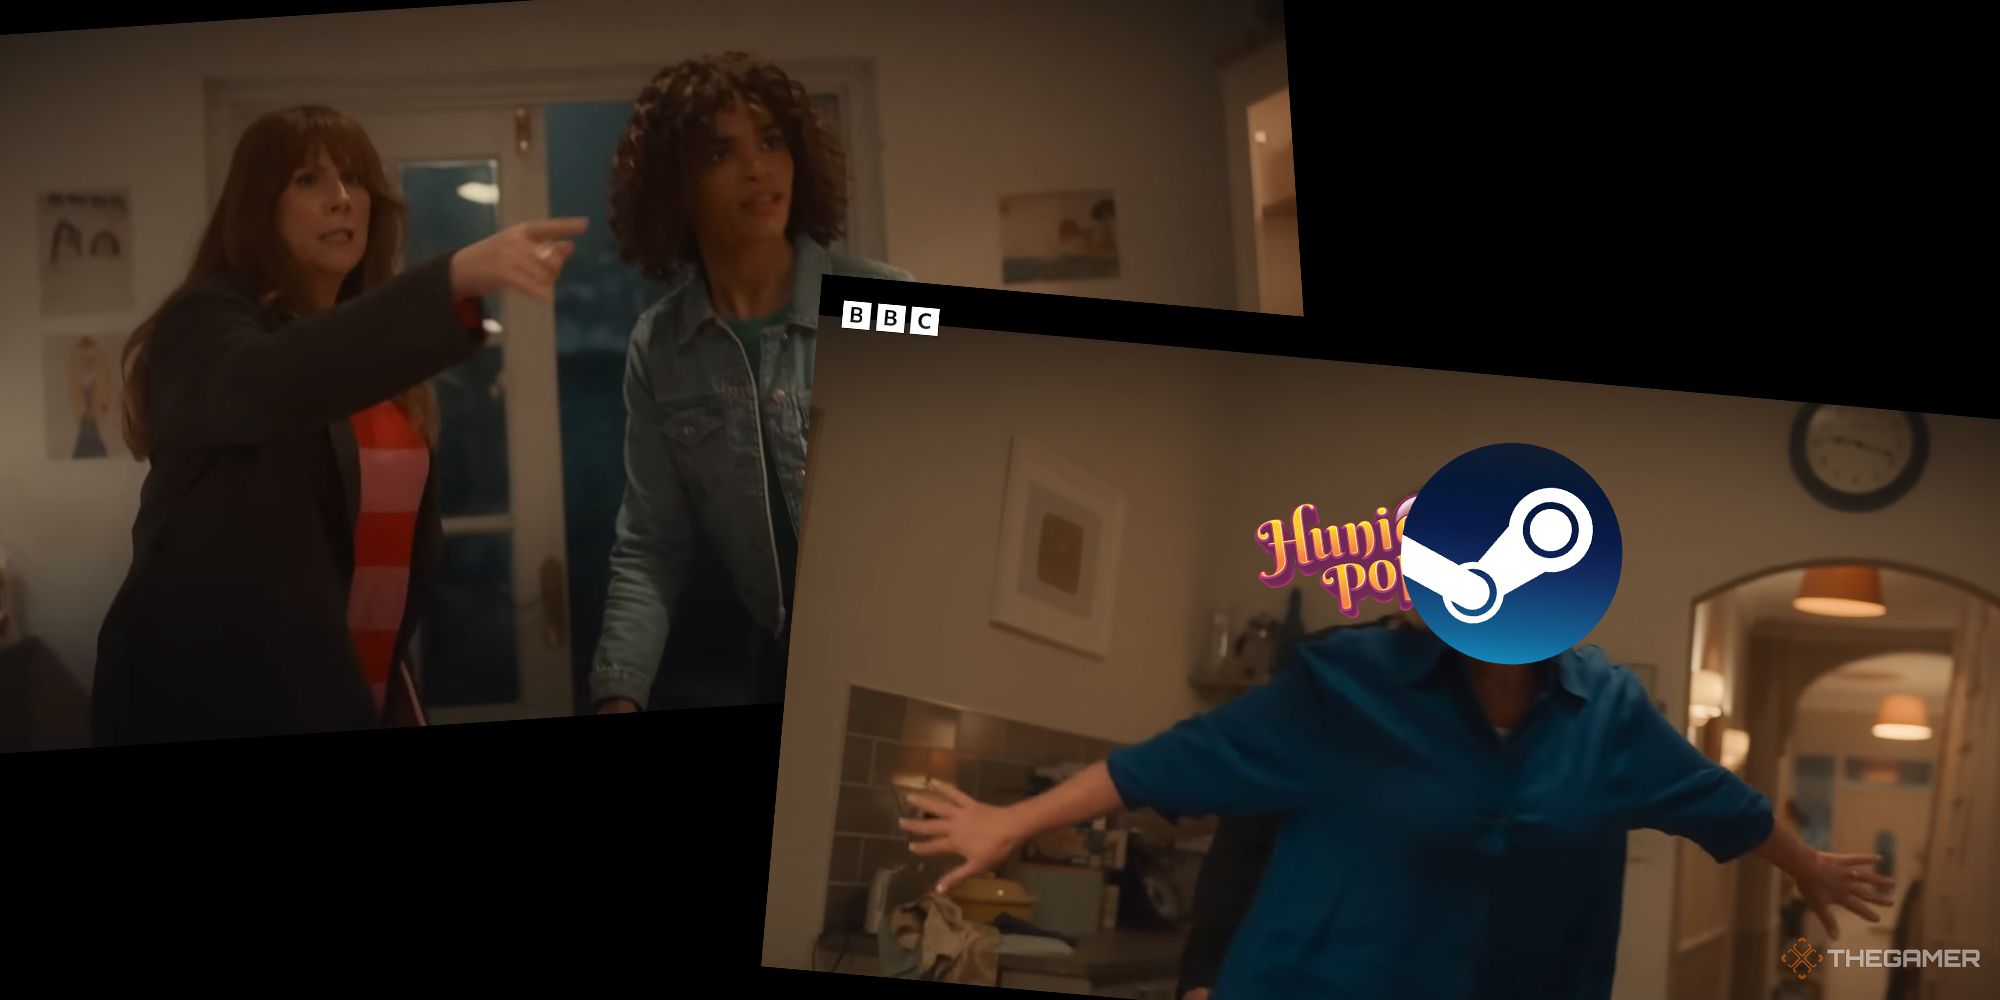 Doctor Who 60th anniversary trailer shot where Donna and Rose point at Donna's mum as she hides the 14th Doctor, but her mum has the Steam logo for a face and the 14th Doctor is Huniepop